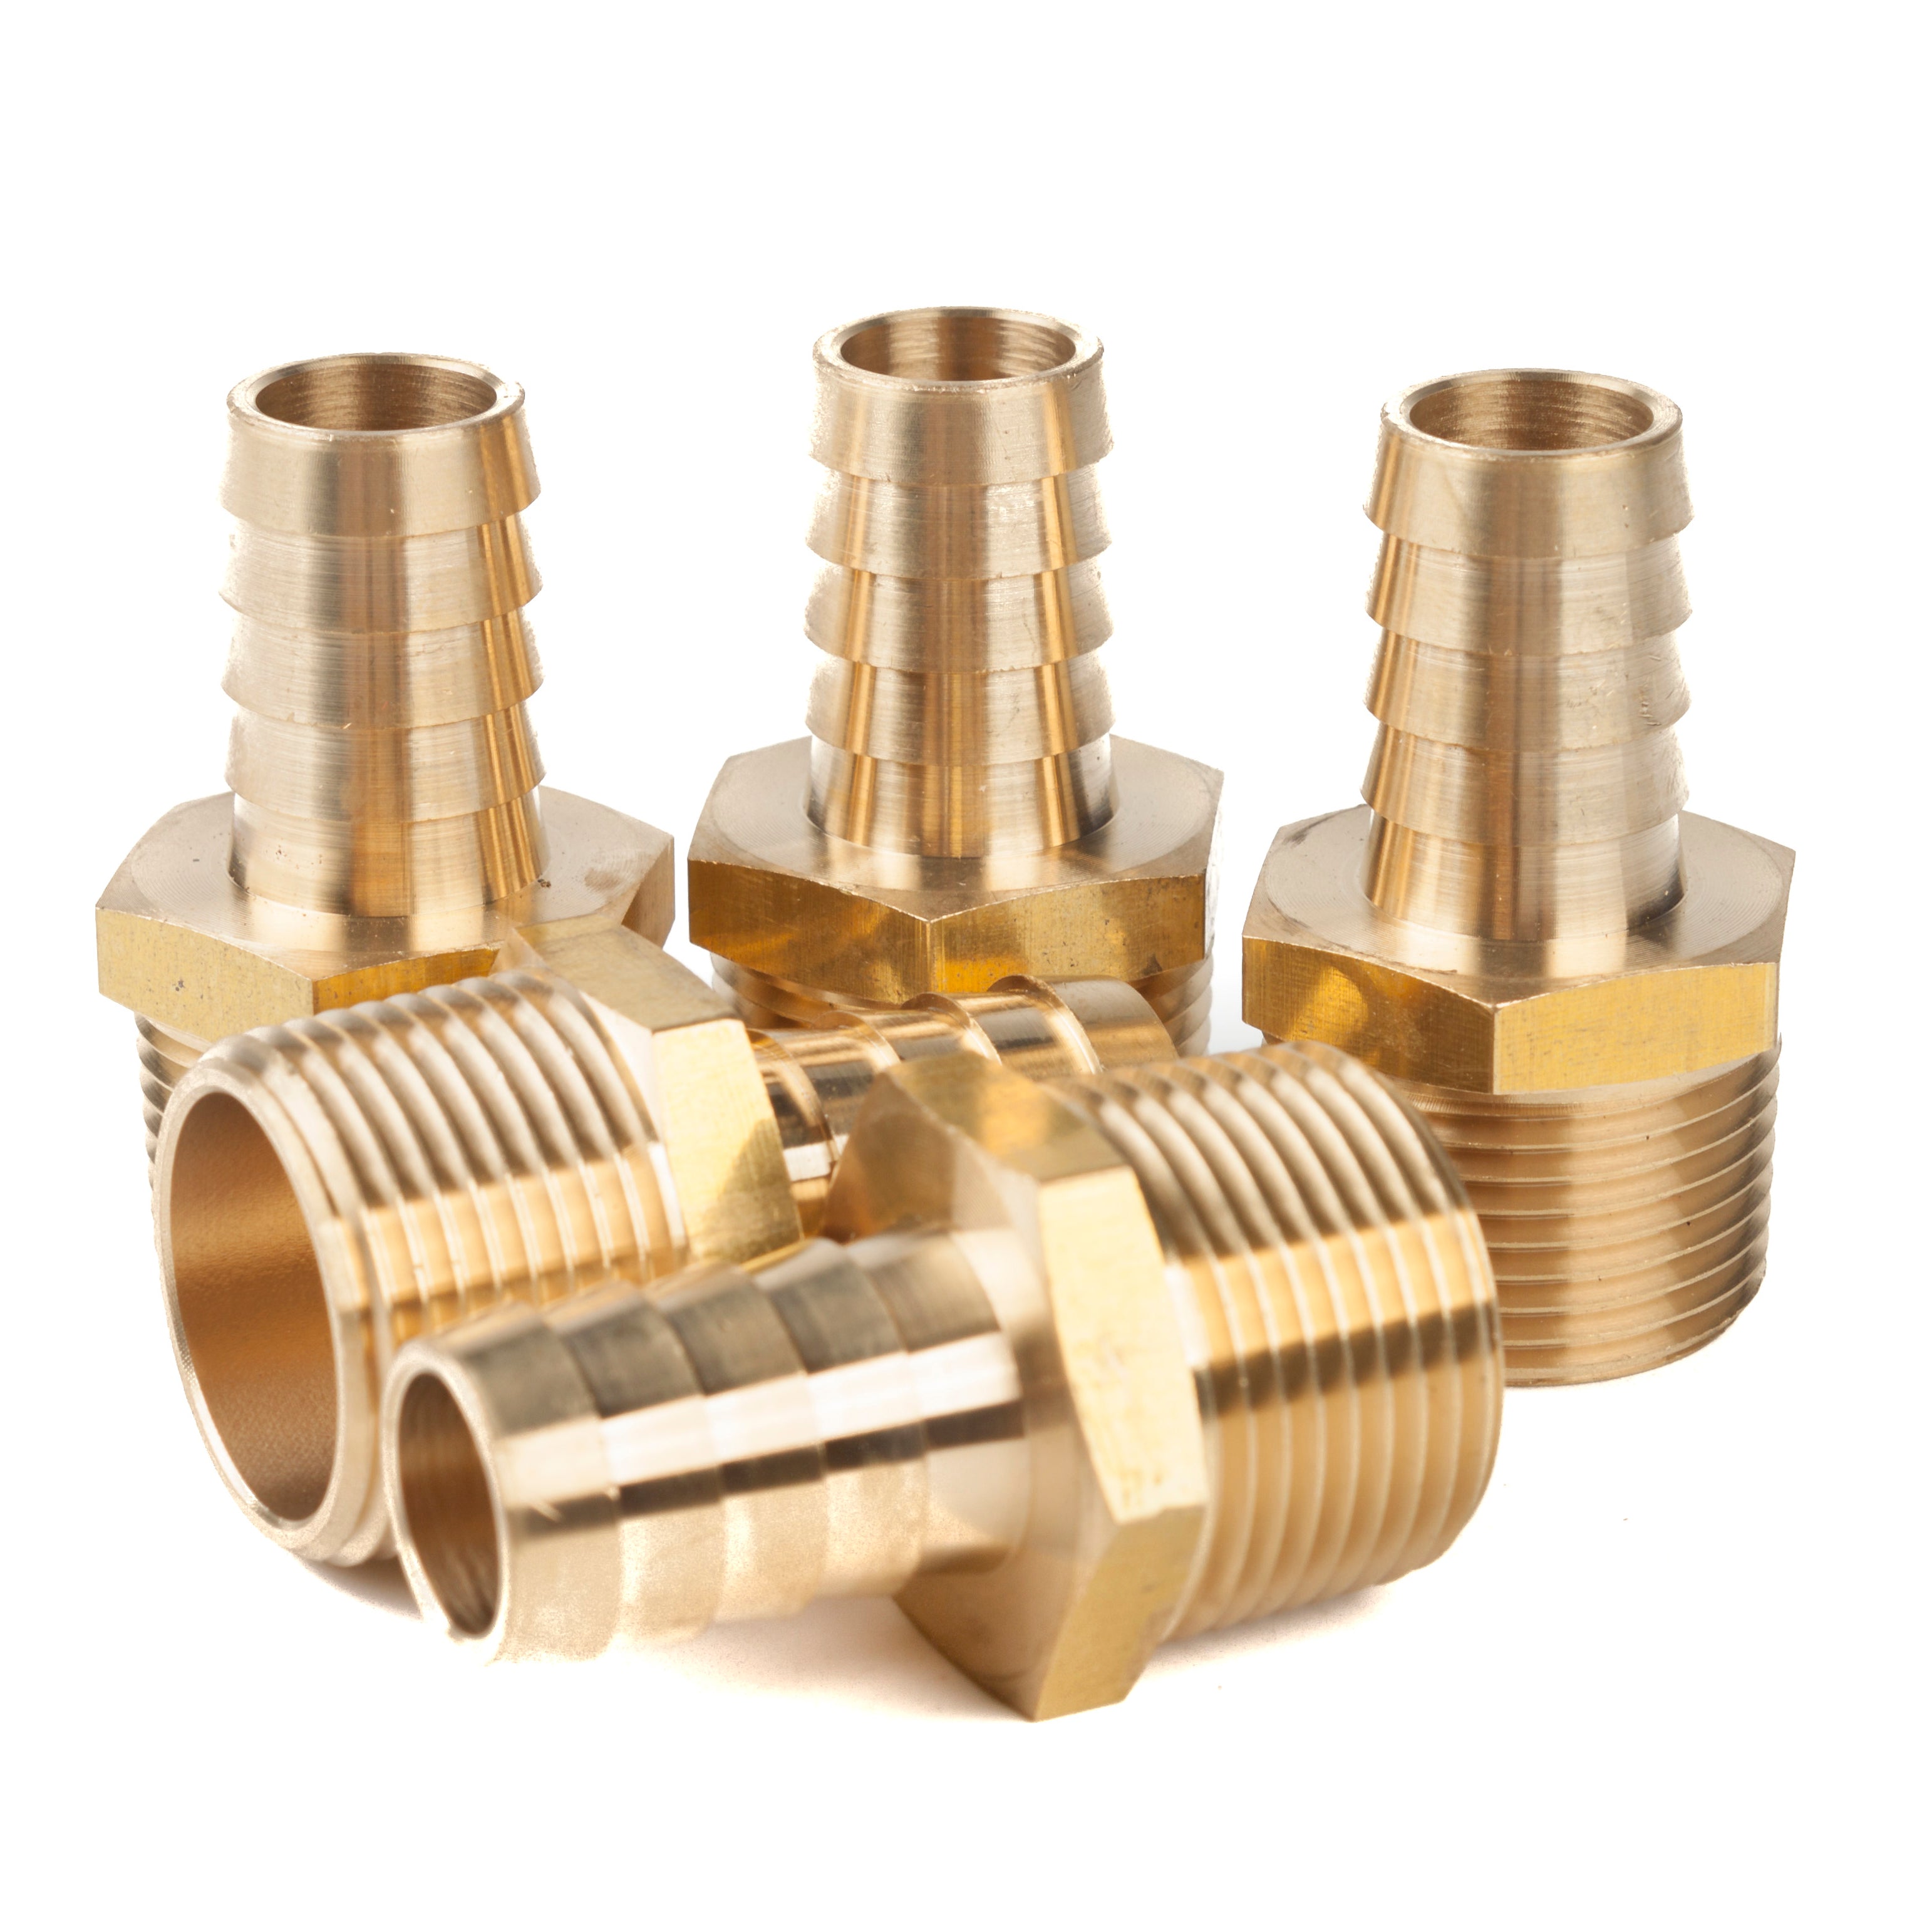 LTWFITTING Lead Free Brass Barbed Fitting Coupler/Connector 5/8 Inch Hose Barb x 3/4 Inch Male NPT Fuel Gas Water (Pack of 5)